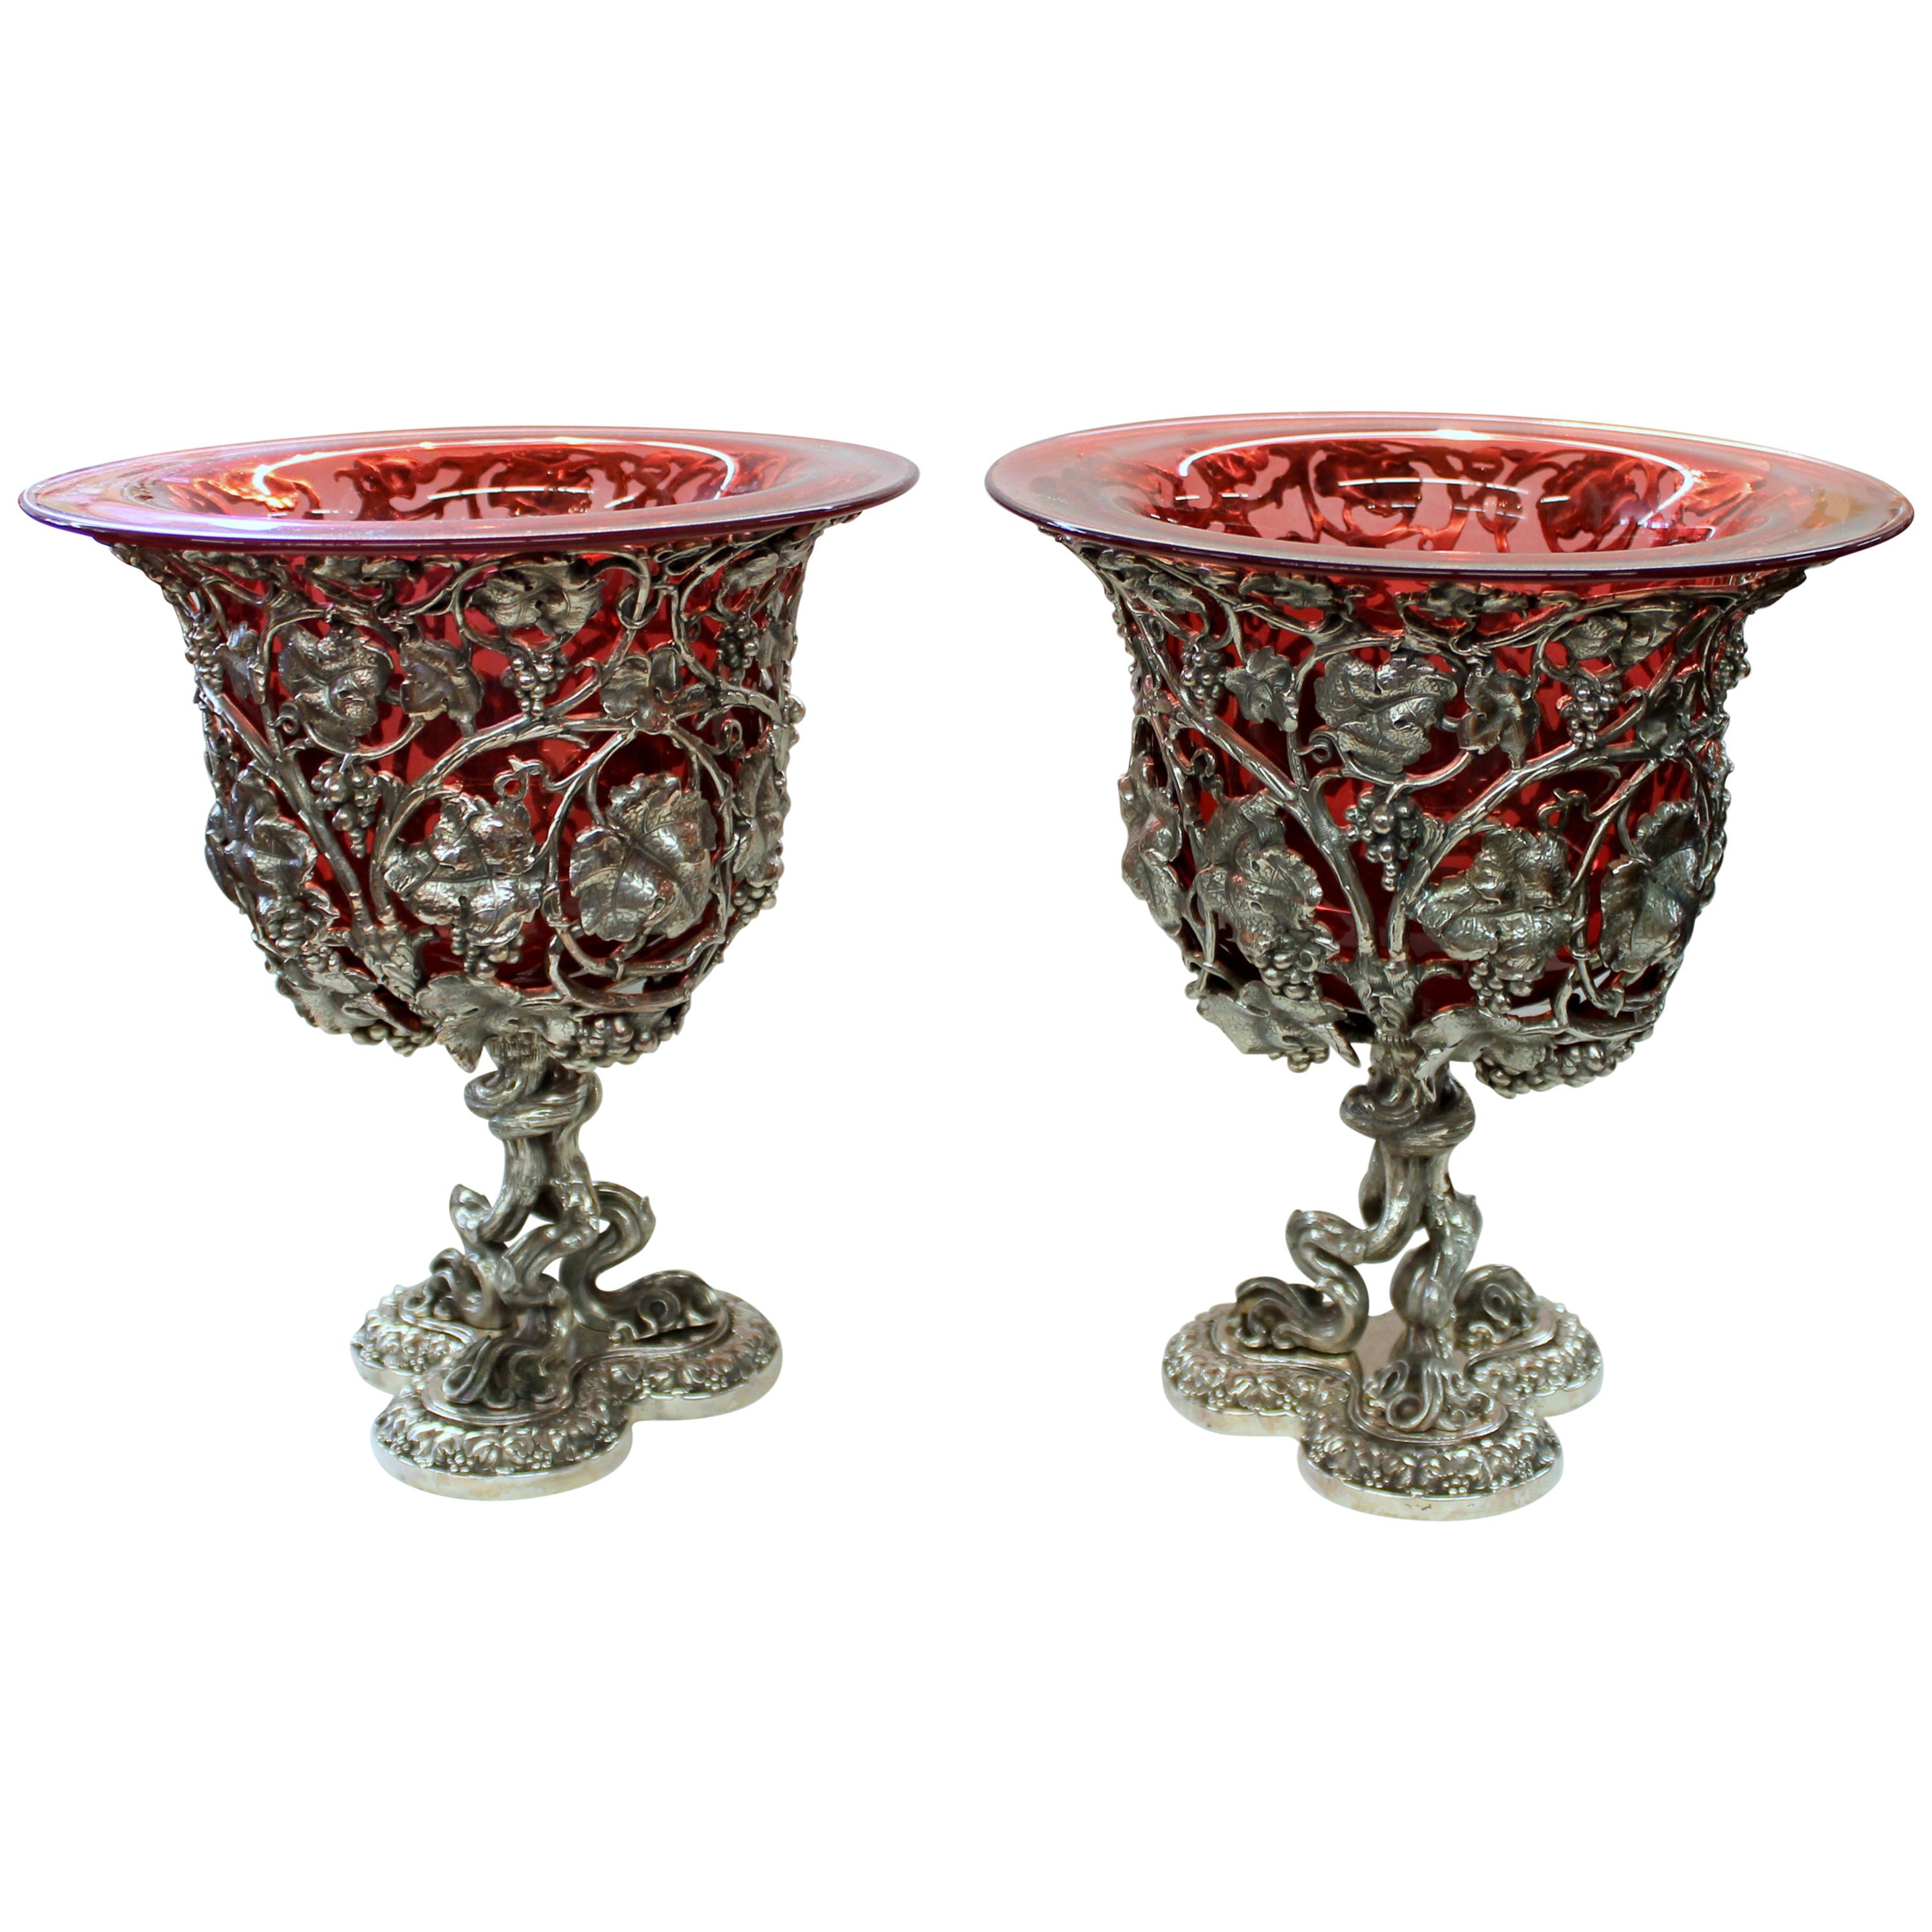 Pair of Sheffield Silver Plate Rococo Style Wine Coolers